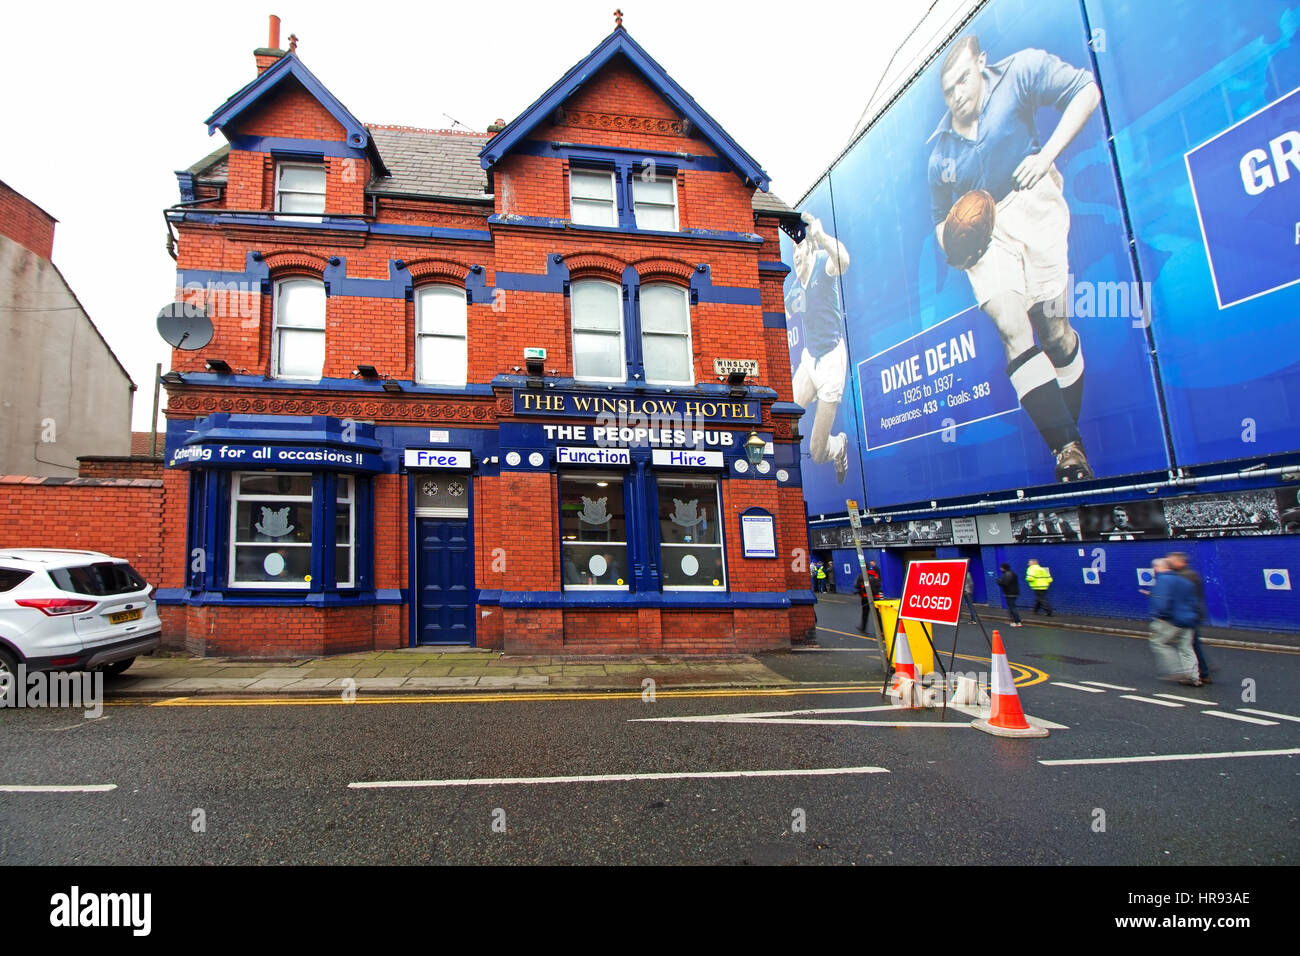 The Winslow Hotel 'The Peoples Pub' situated right next to Everton Football Club's Goodison Park Stadium Stock Photo